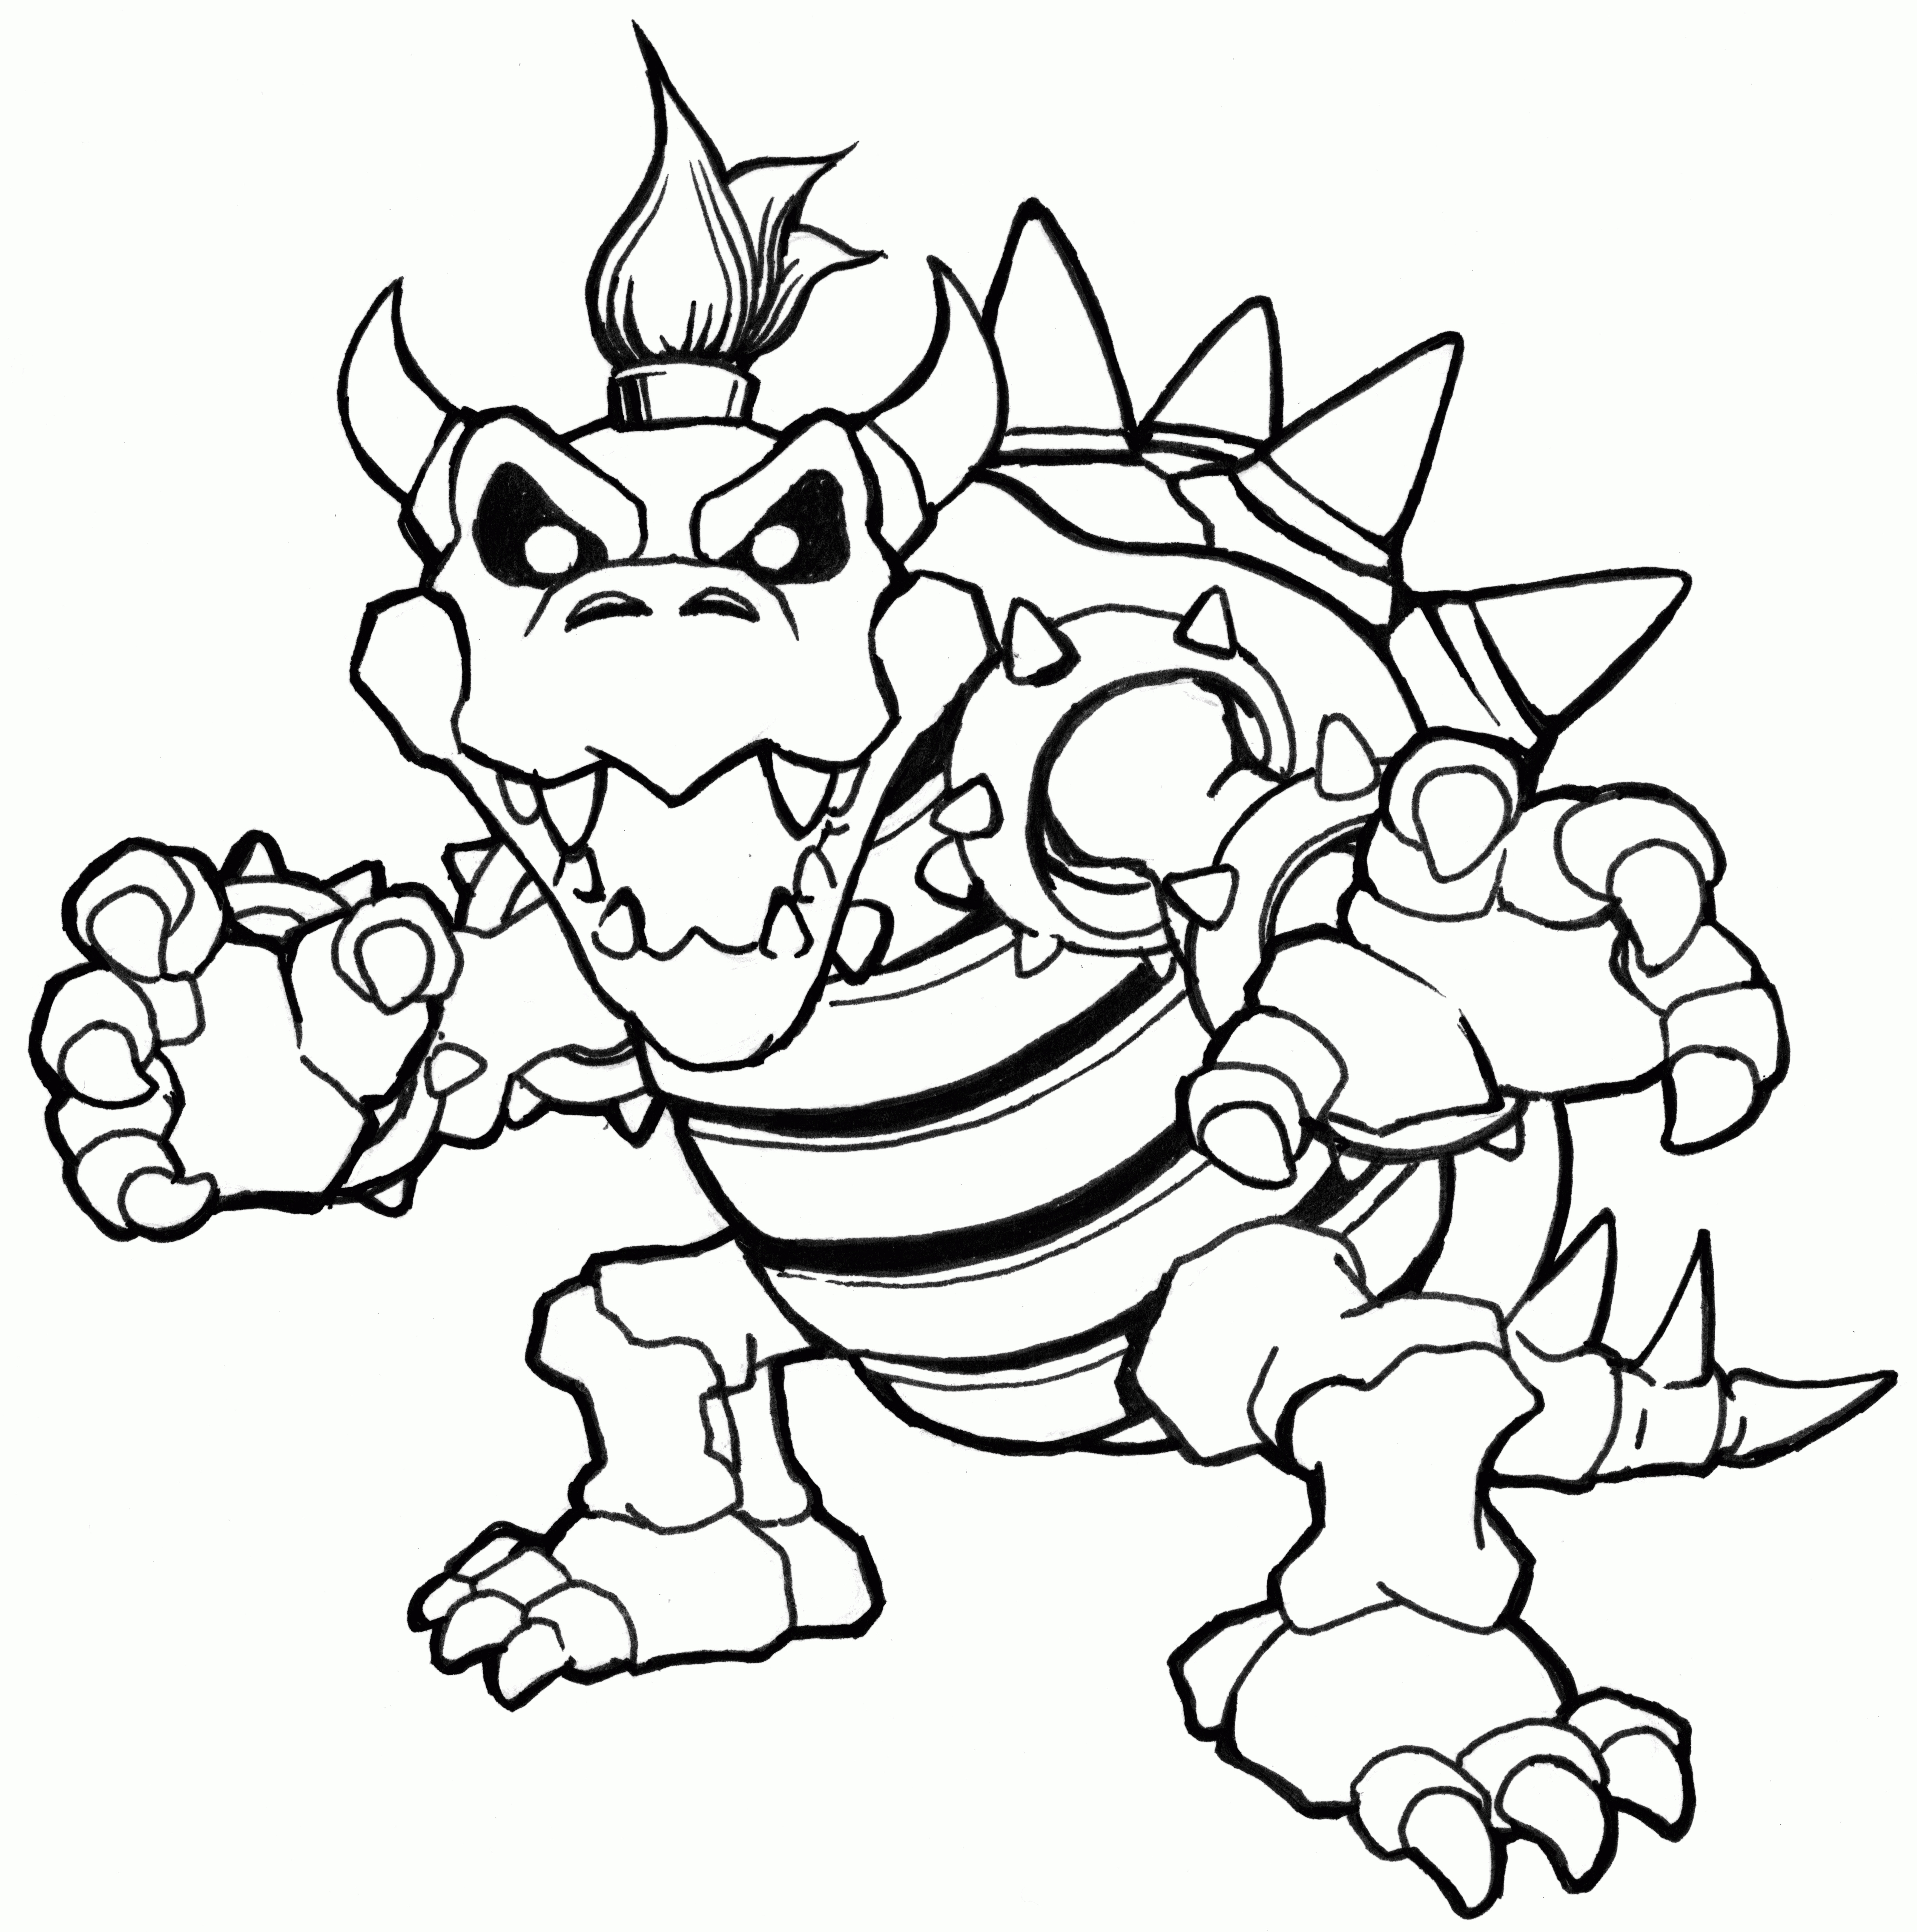 Bowser Coloring Pages
 Koopalings Coloring Pages Coloring Home